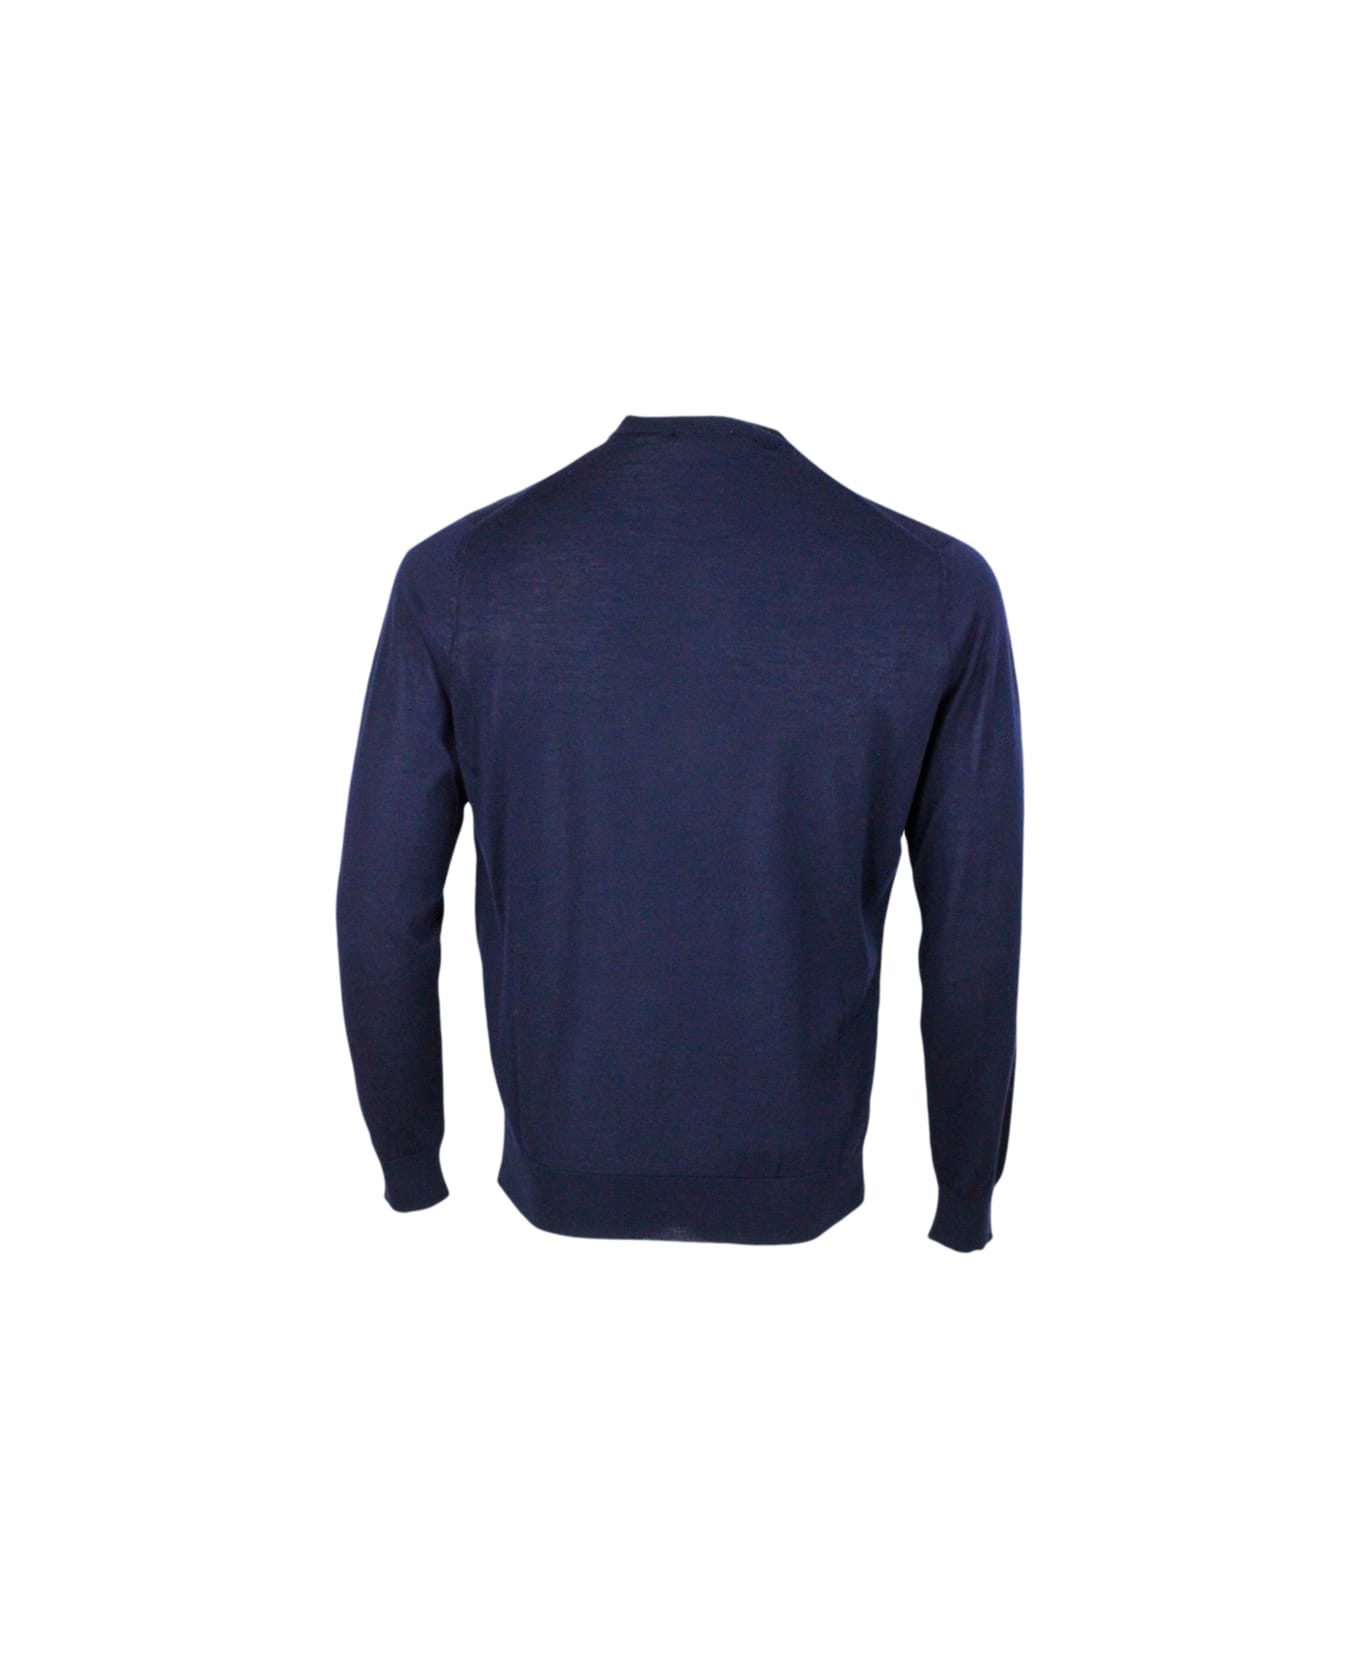 Colombo Light Crew Neck Long Sleeve Sweater In Fine 100% Cashmere And Silk With Special Processing On The Profile Of The Neck - Blu navy ニットウェア